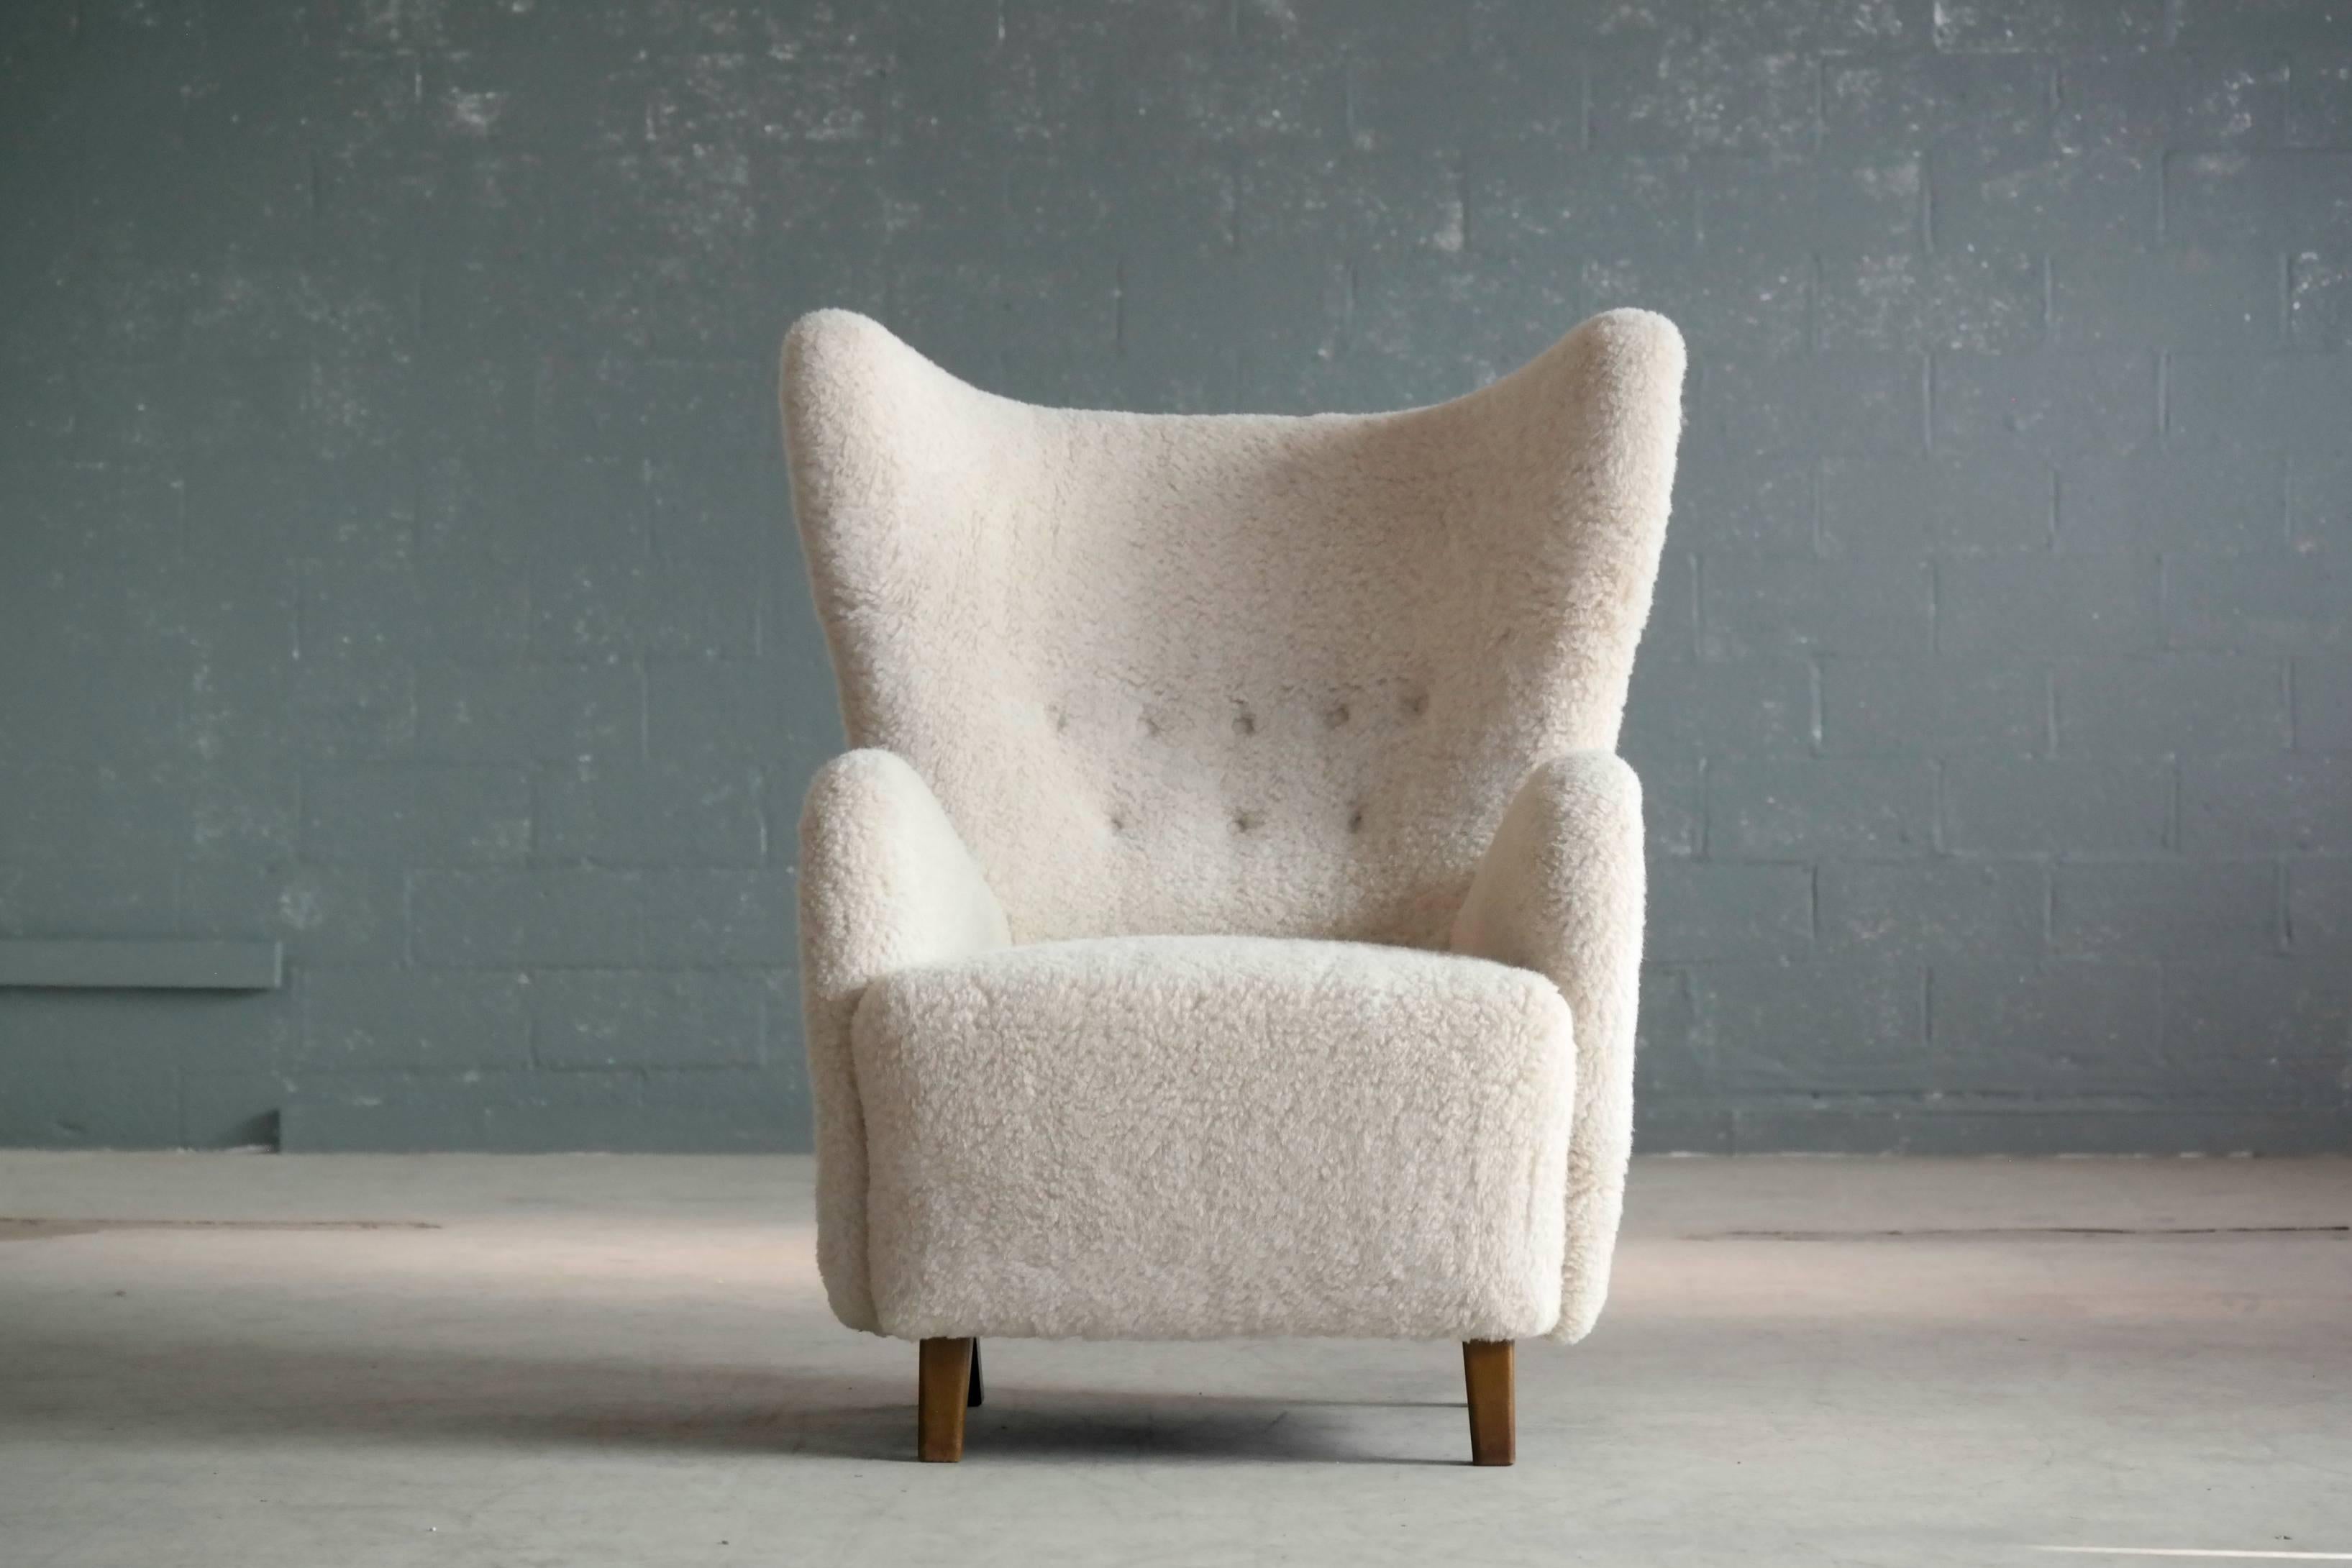 Beautiful Flemming Lassen attributed high back lounge chair in lamb’s wool made circa 1940s. This iconic ultra-elegant lounge chair is probably one of the most perfect high backs ever designed. Perfect statement piece yet very comfortable.

The